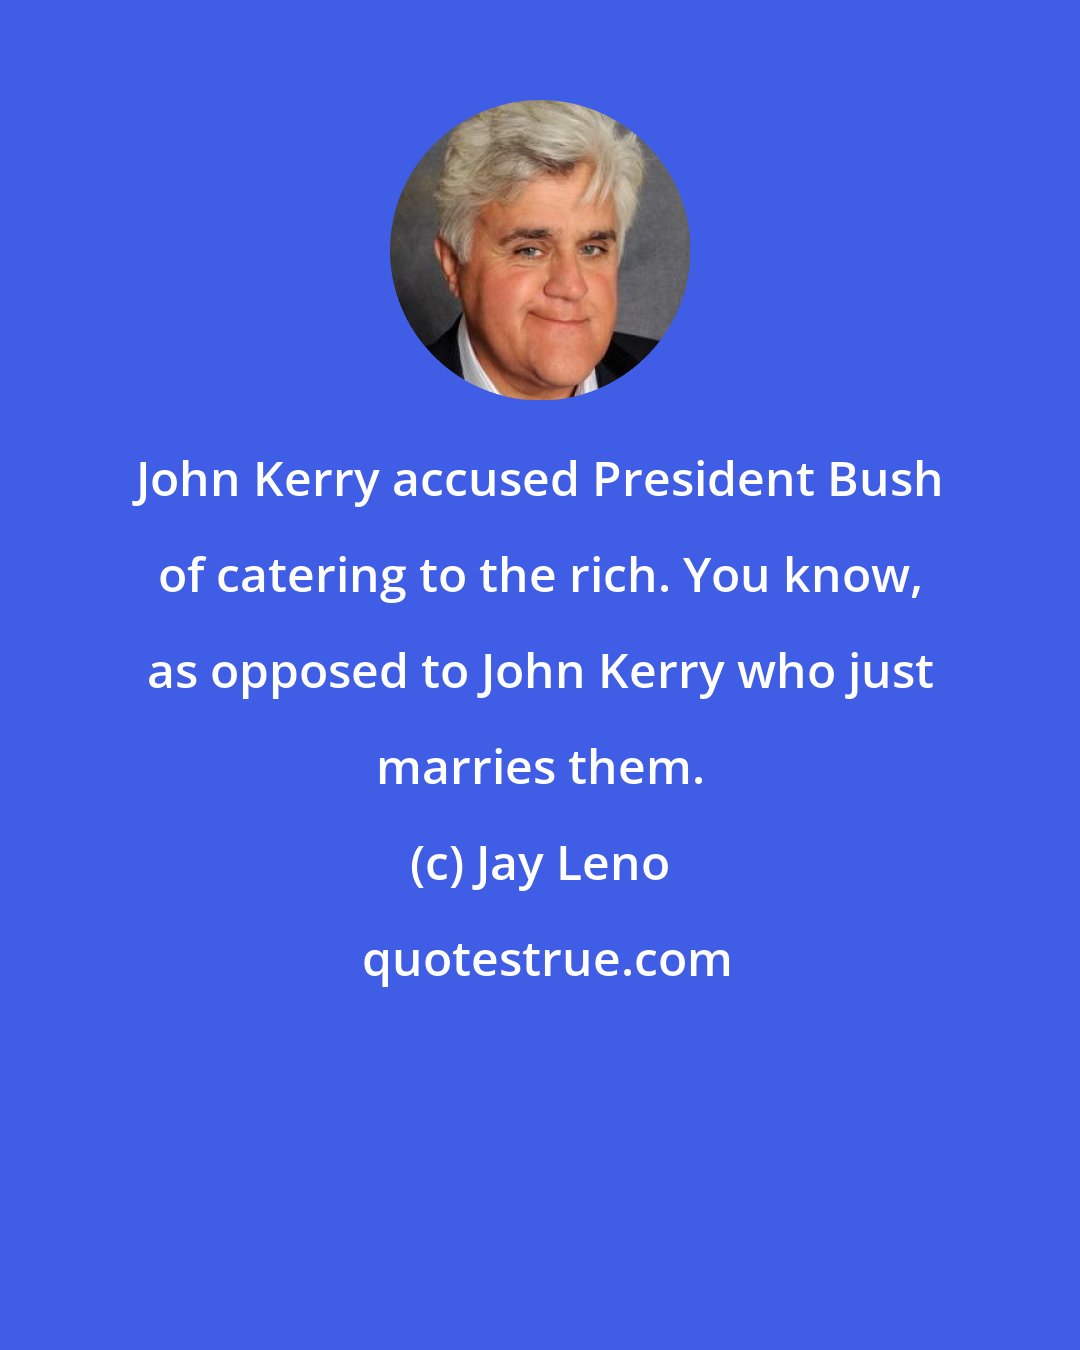 Jay Leno: John Kerry accused President Bush of catering to the rich. You know, as opposed to John Kerry who just marries them.